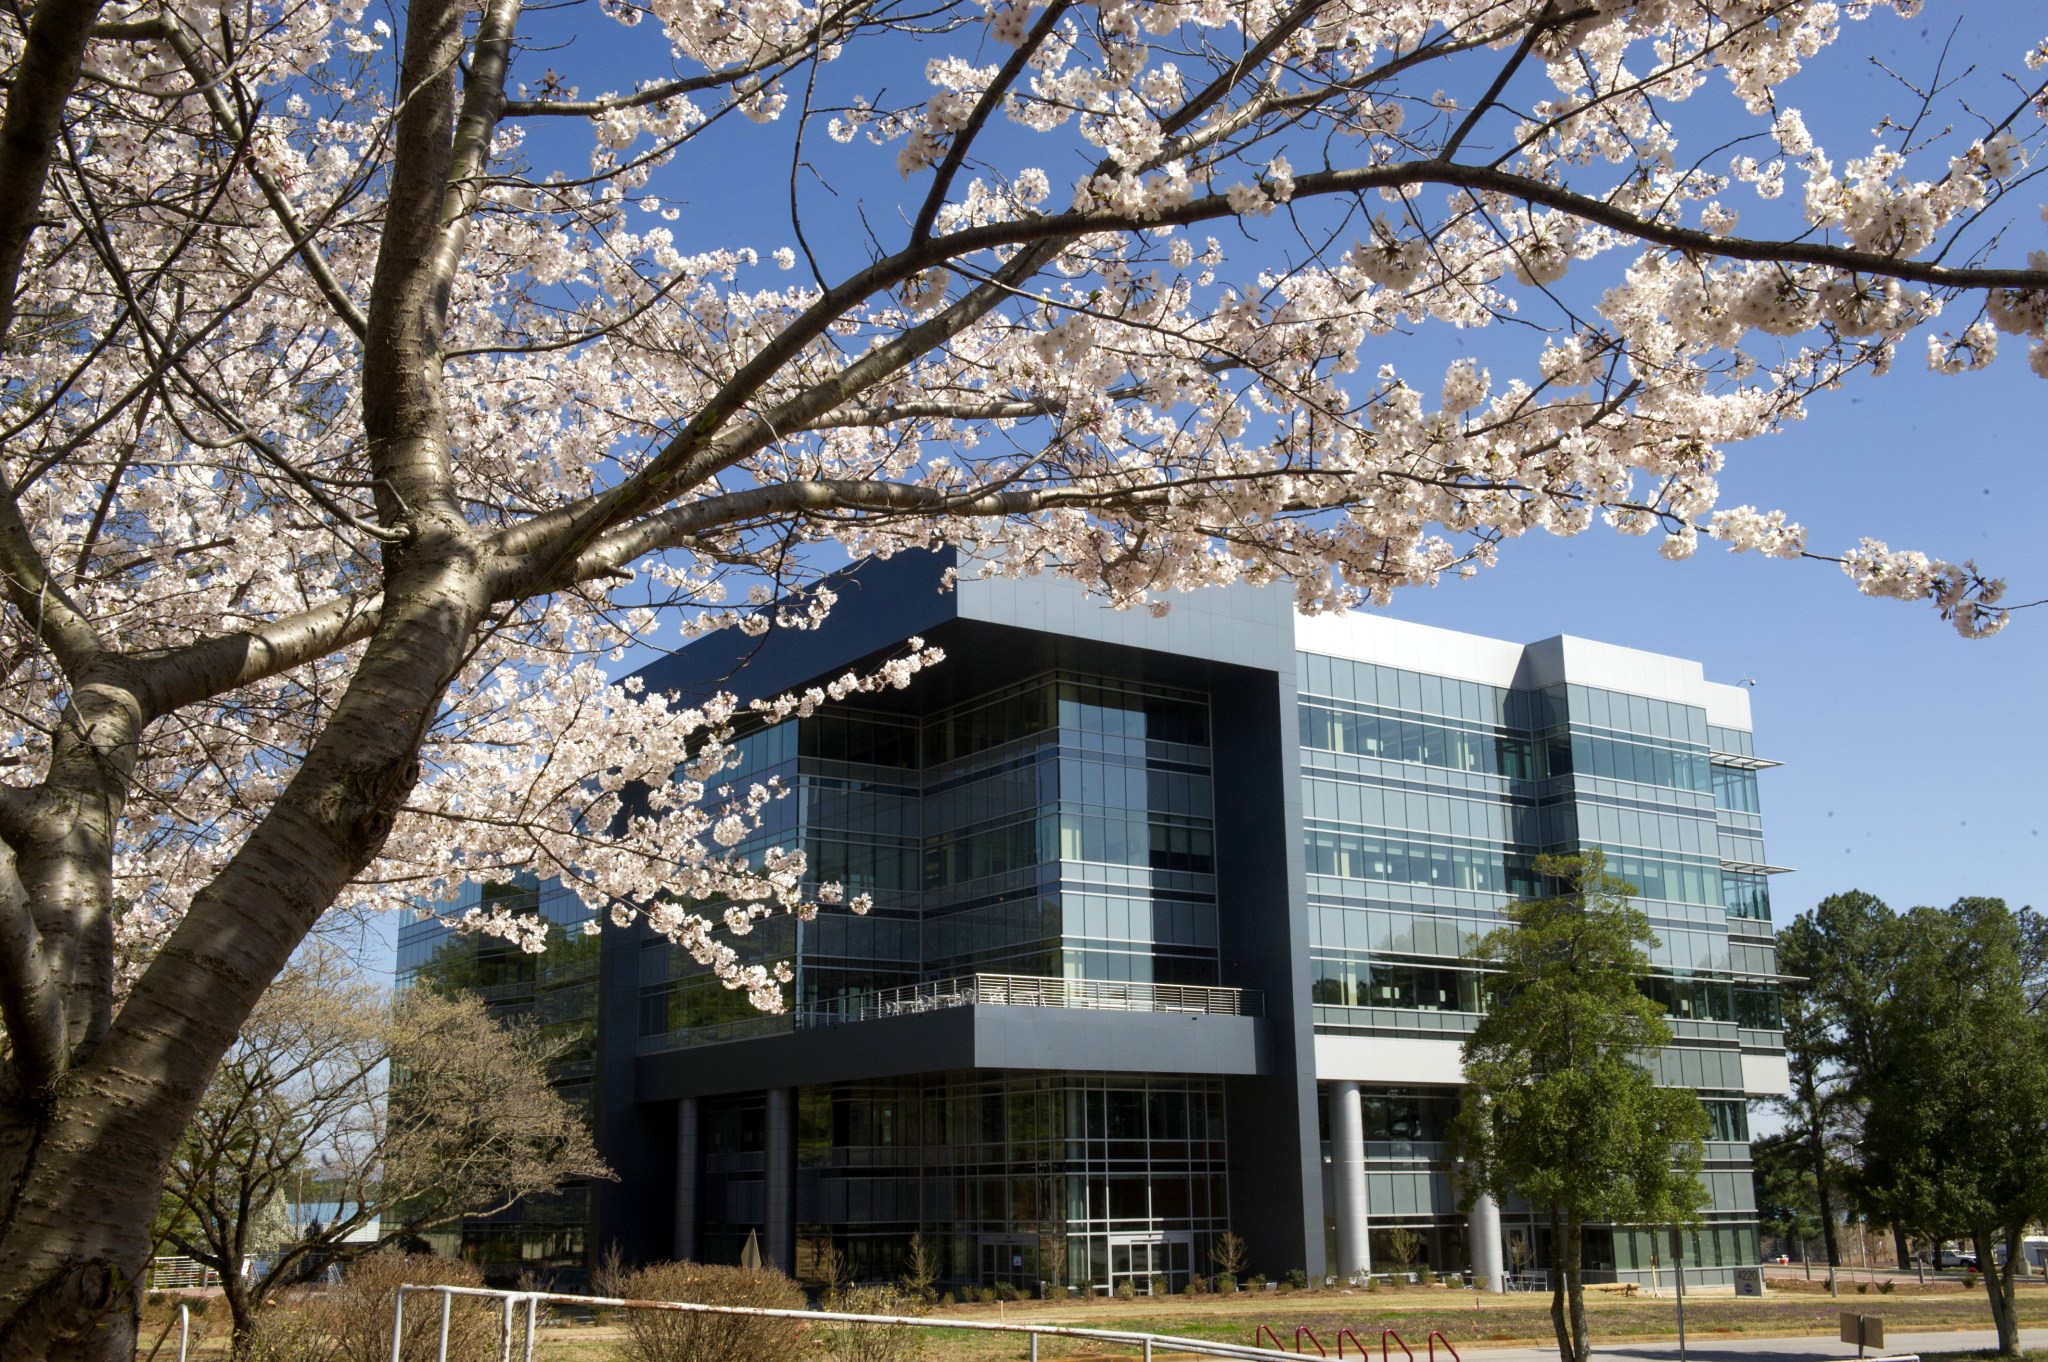 Spring is in full bloom outside Building 4220 in this 2014 image. 